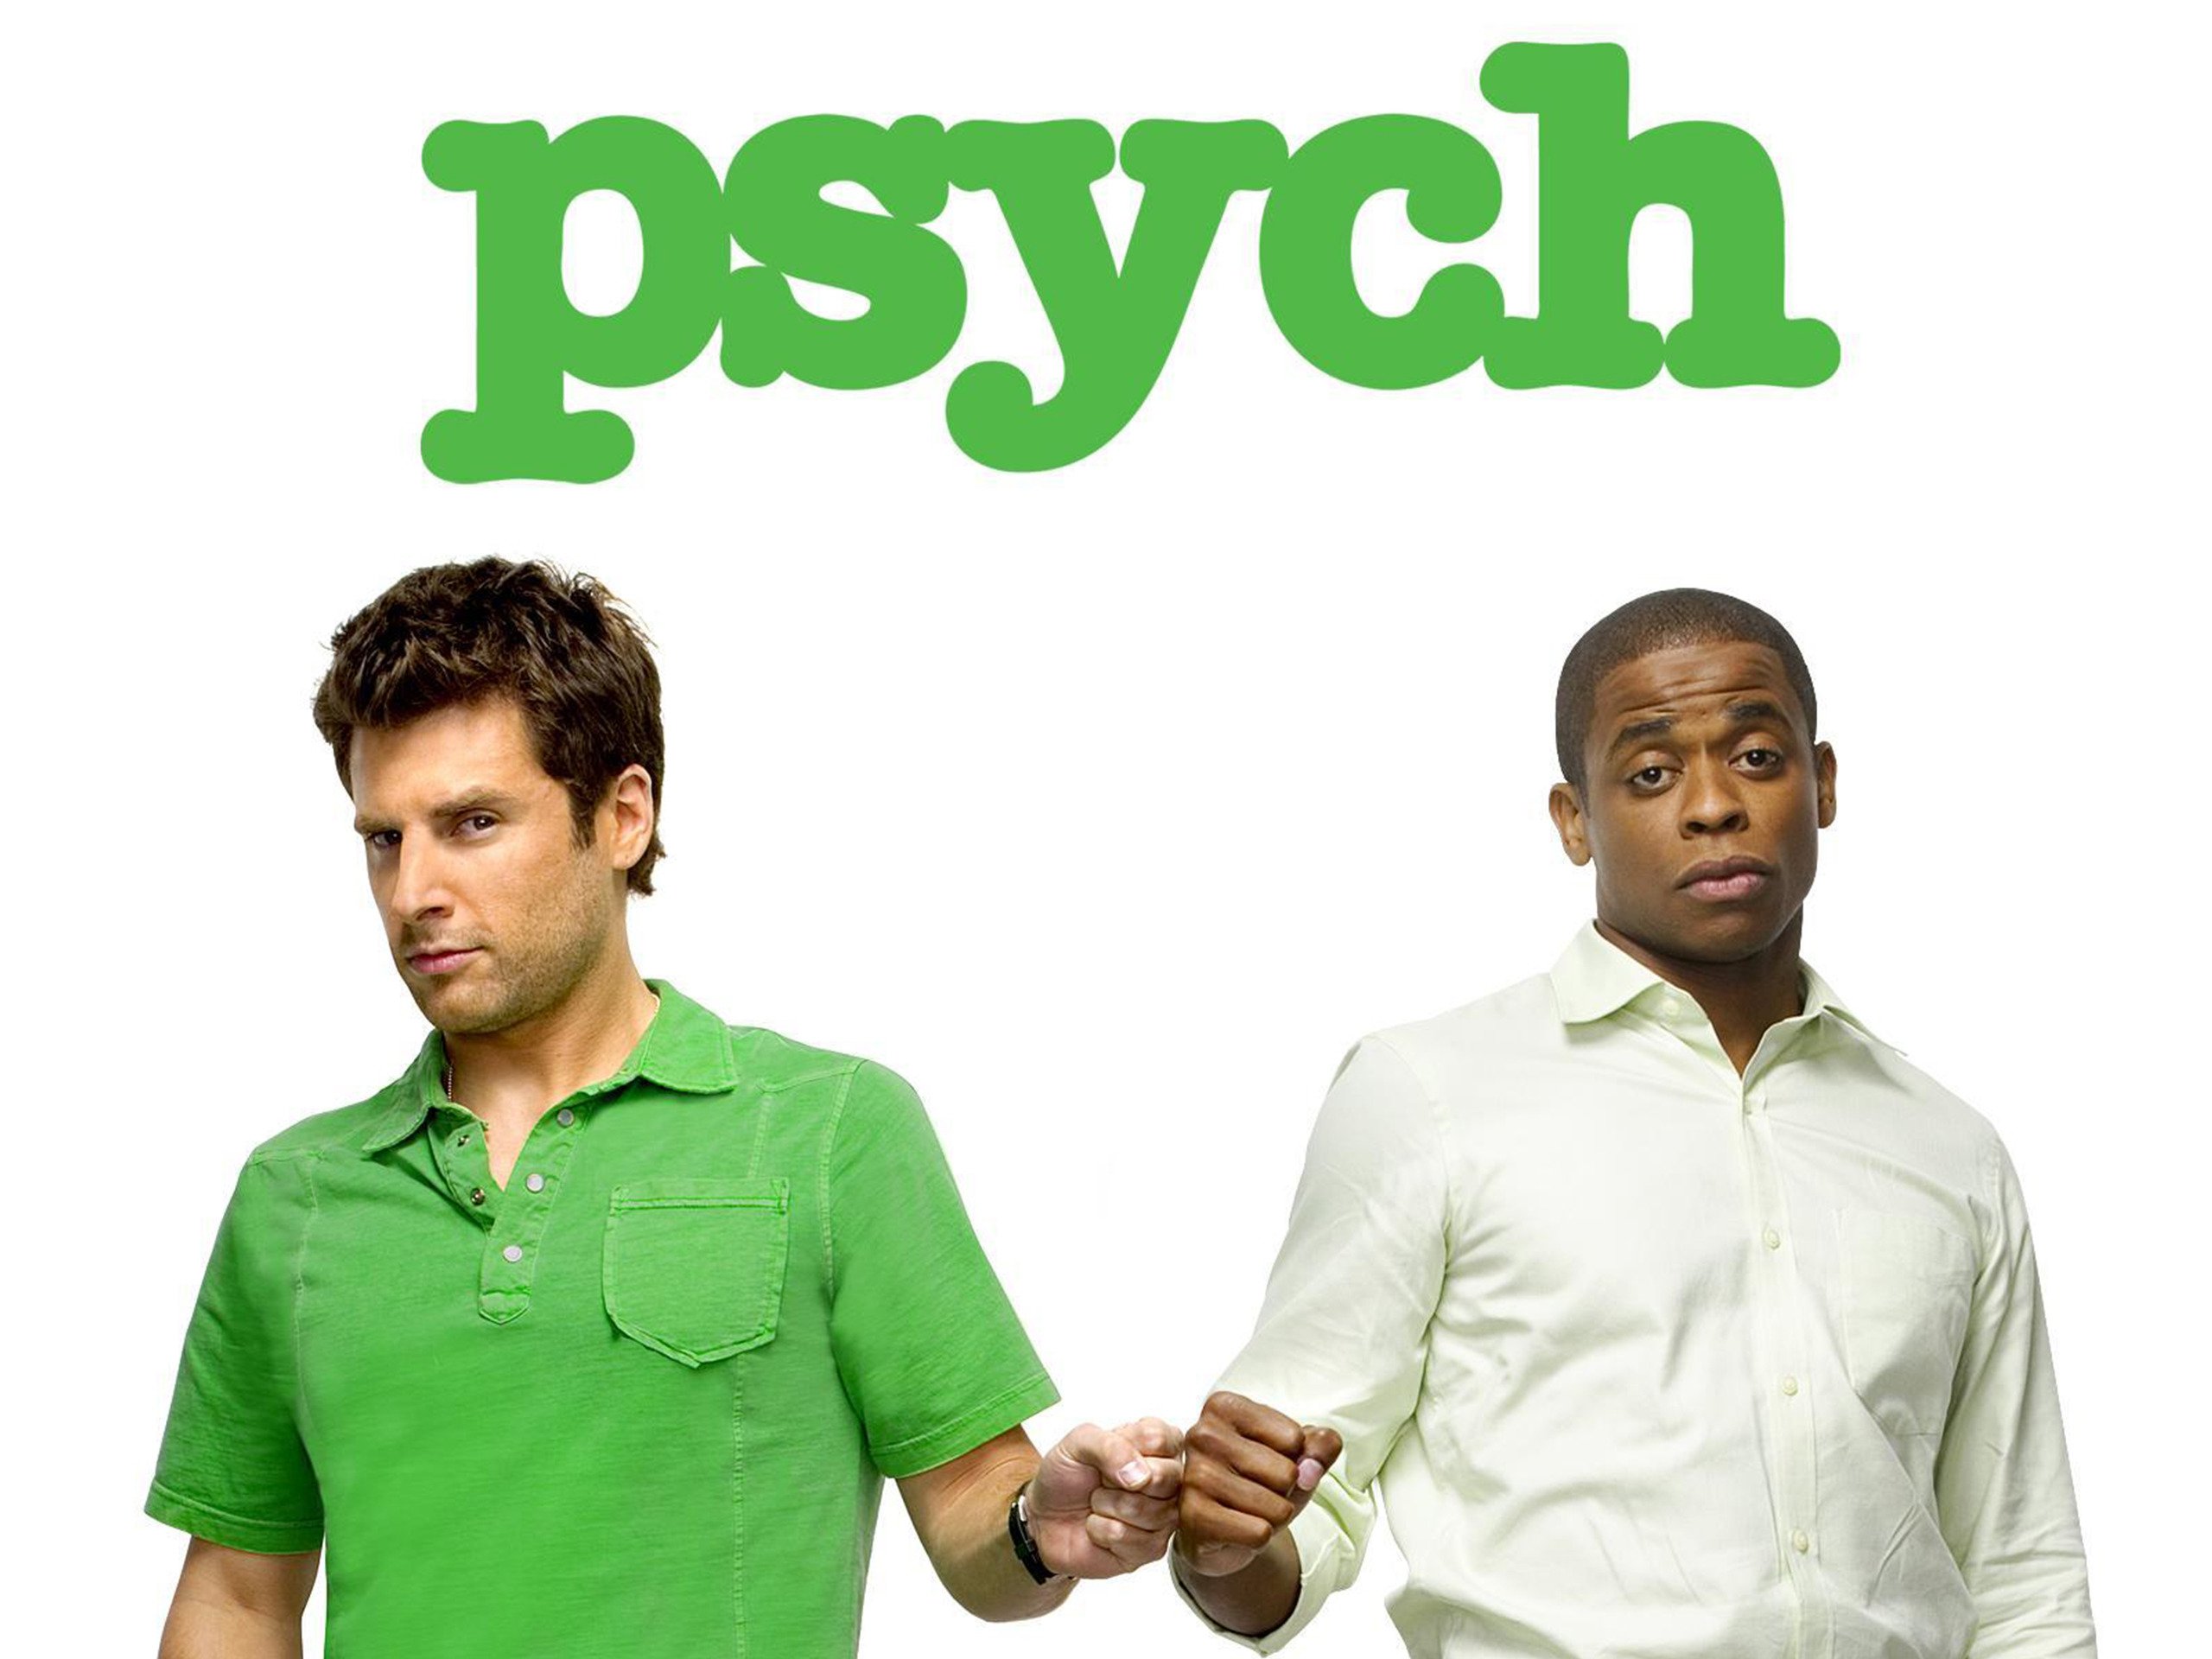 tv show, psych, dulé hill, gus (psych), james roday rodriguez, shawn spencer